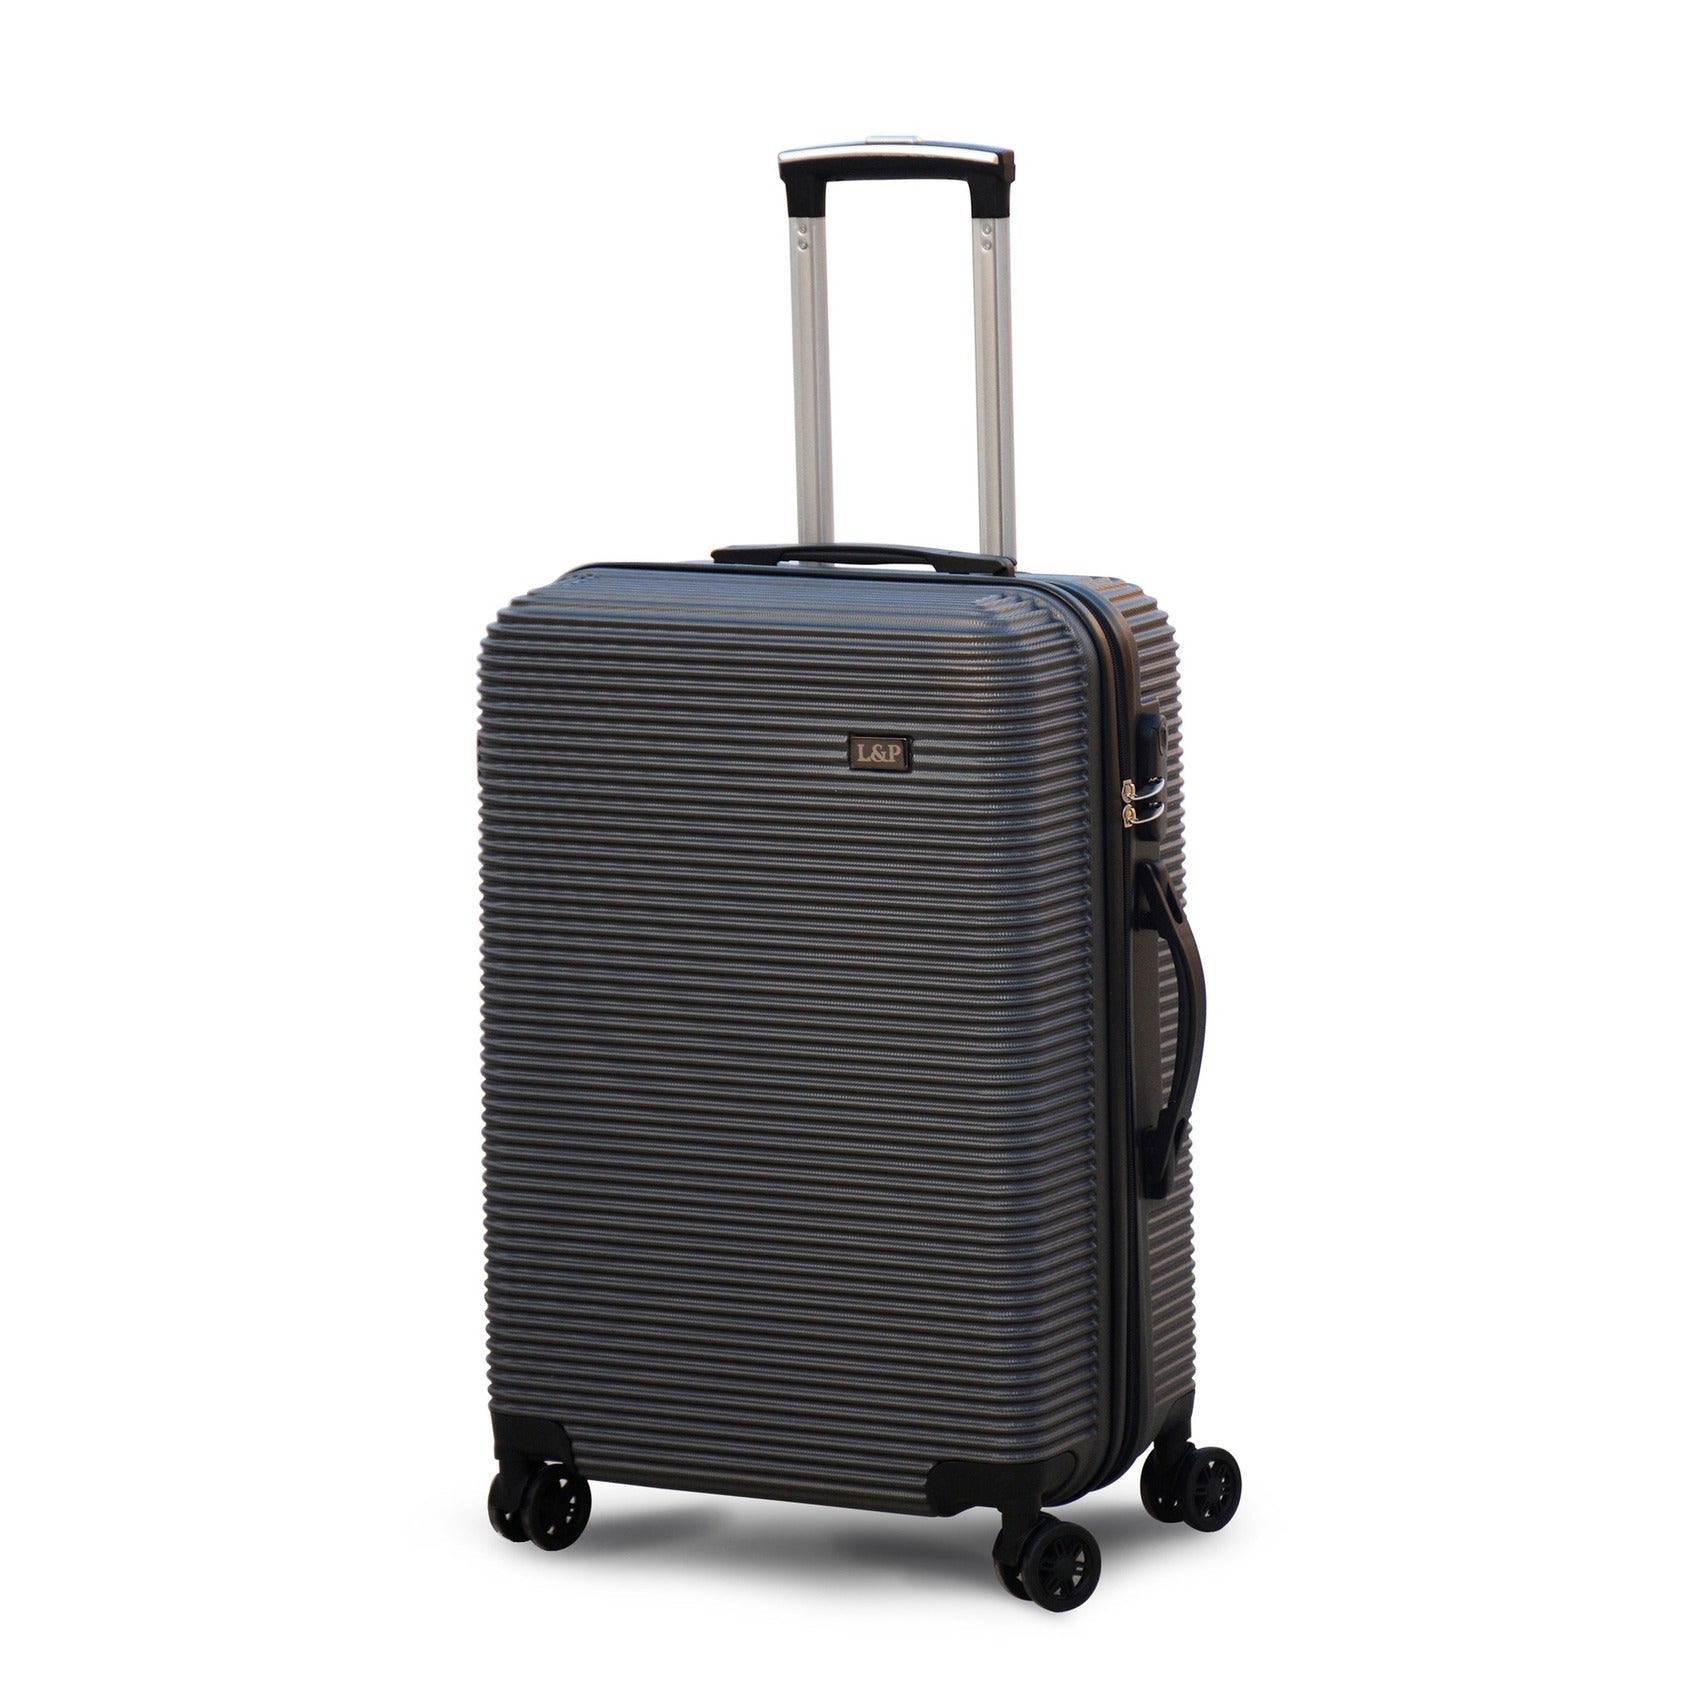 20" Dark Grey Colour JIAN ABS Line Luggage Lightweight Hard Case Carry On Trolley Bag with Spinner Wheel